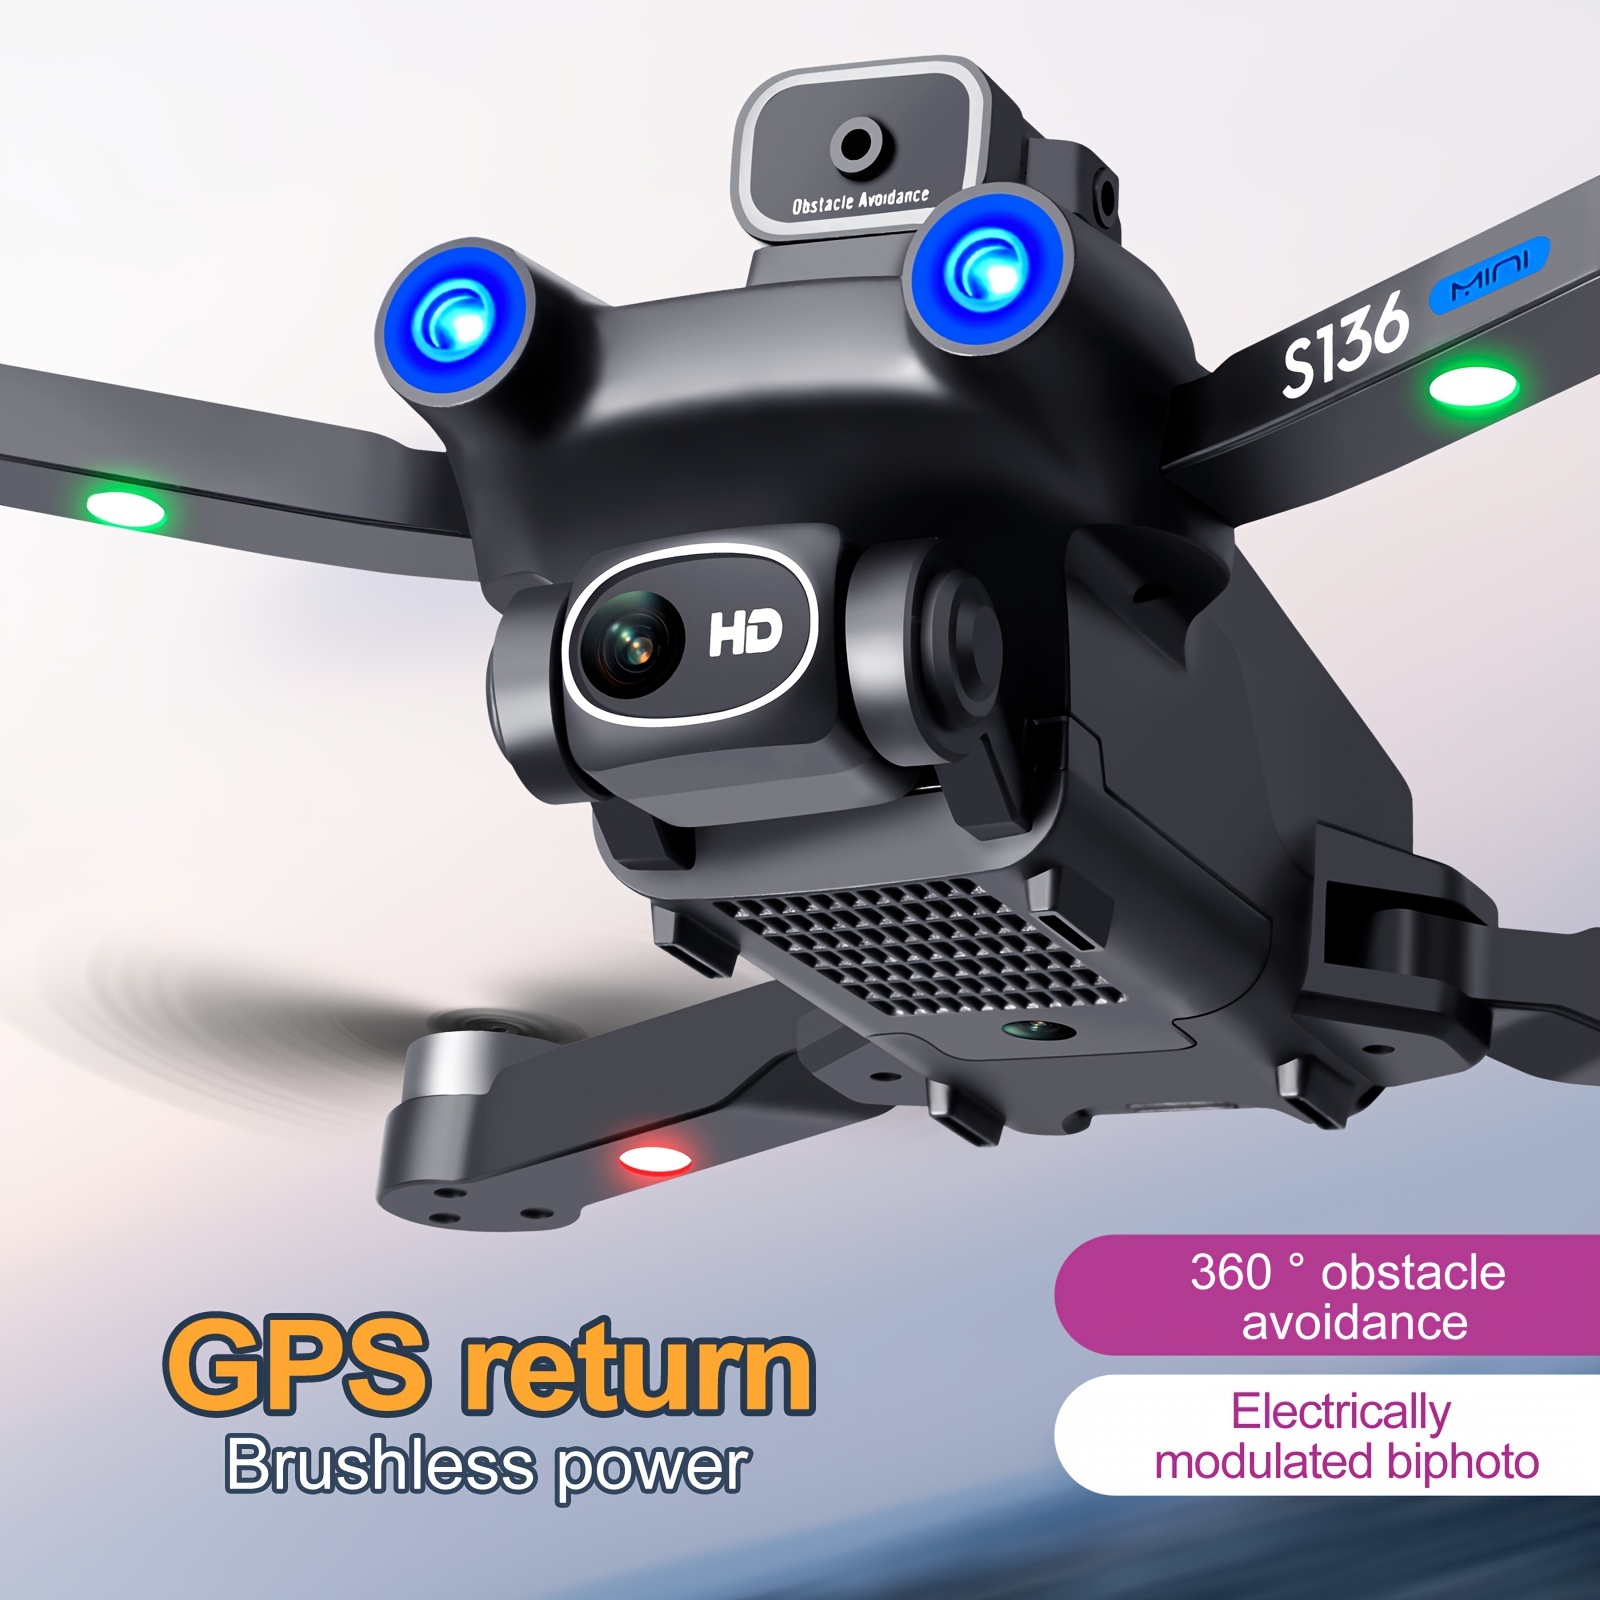 with 2 batteries new s136 quadcopter uav drone with hd esc dual camera gps positioning 360 intelligent obstacle avoidance optical flow hovering one key takeoff and fail safe return perfect for beginners mens gifts details 3